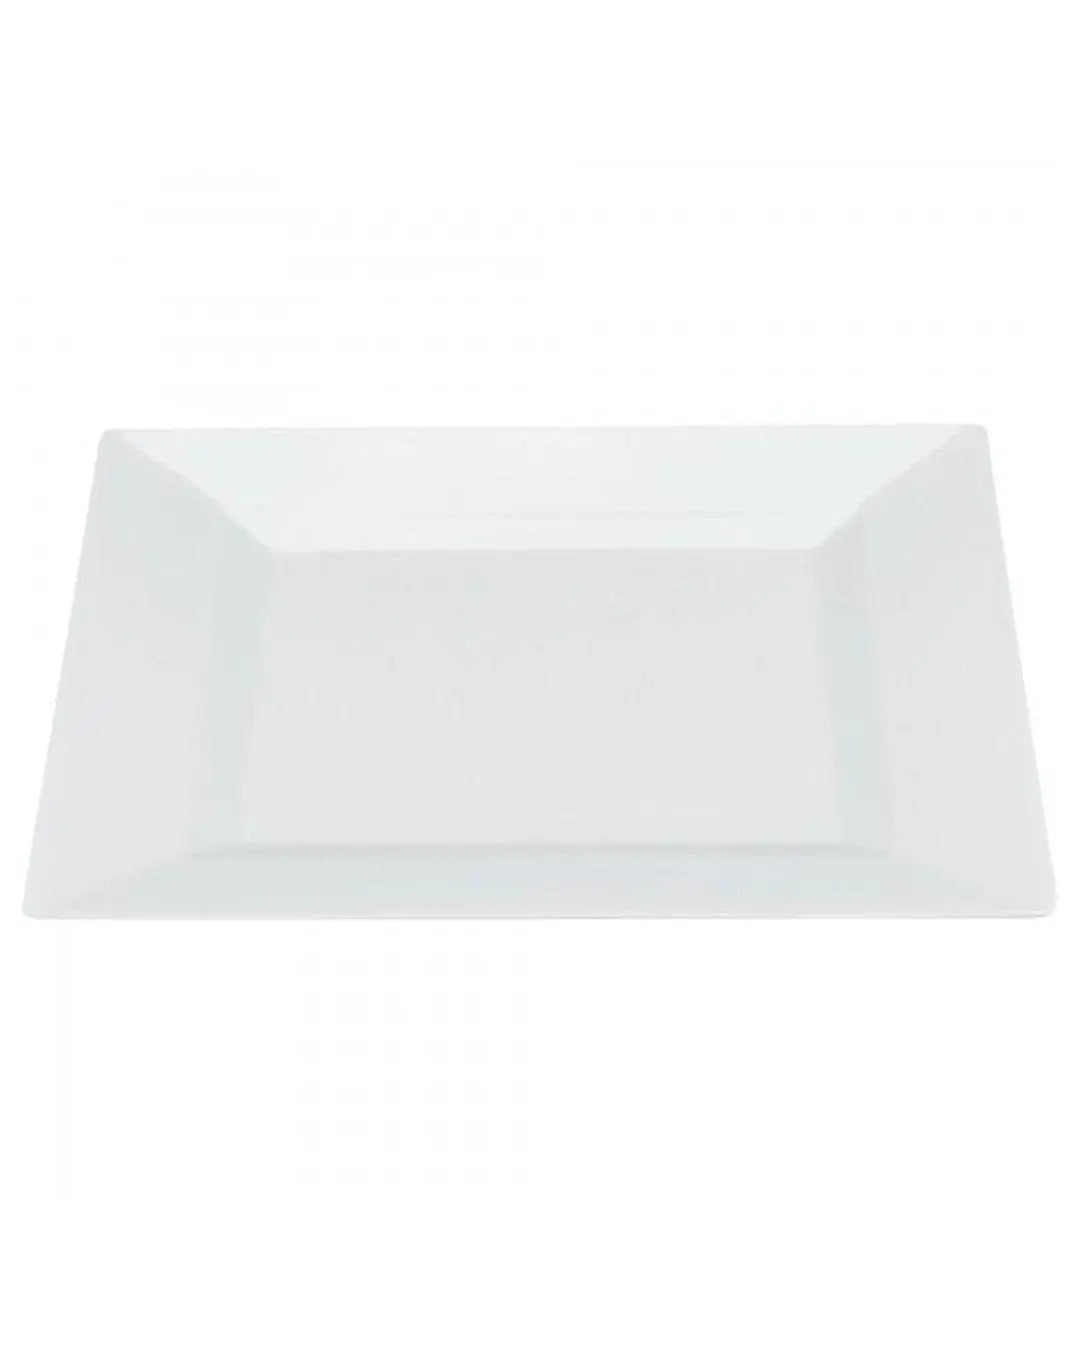 Square White Plastic Plates 18cm Pack Size 10 Partyware 5033298005643